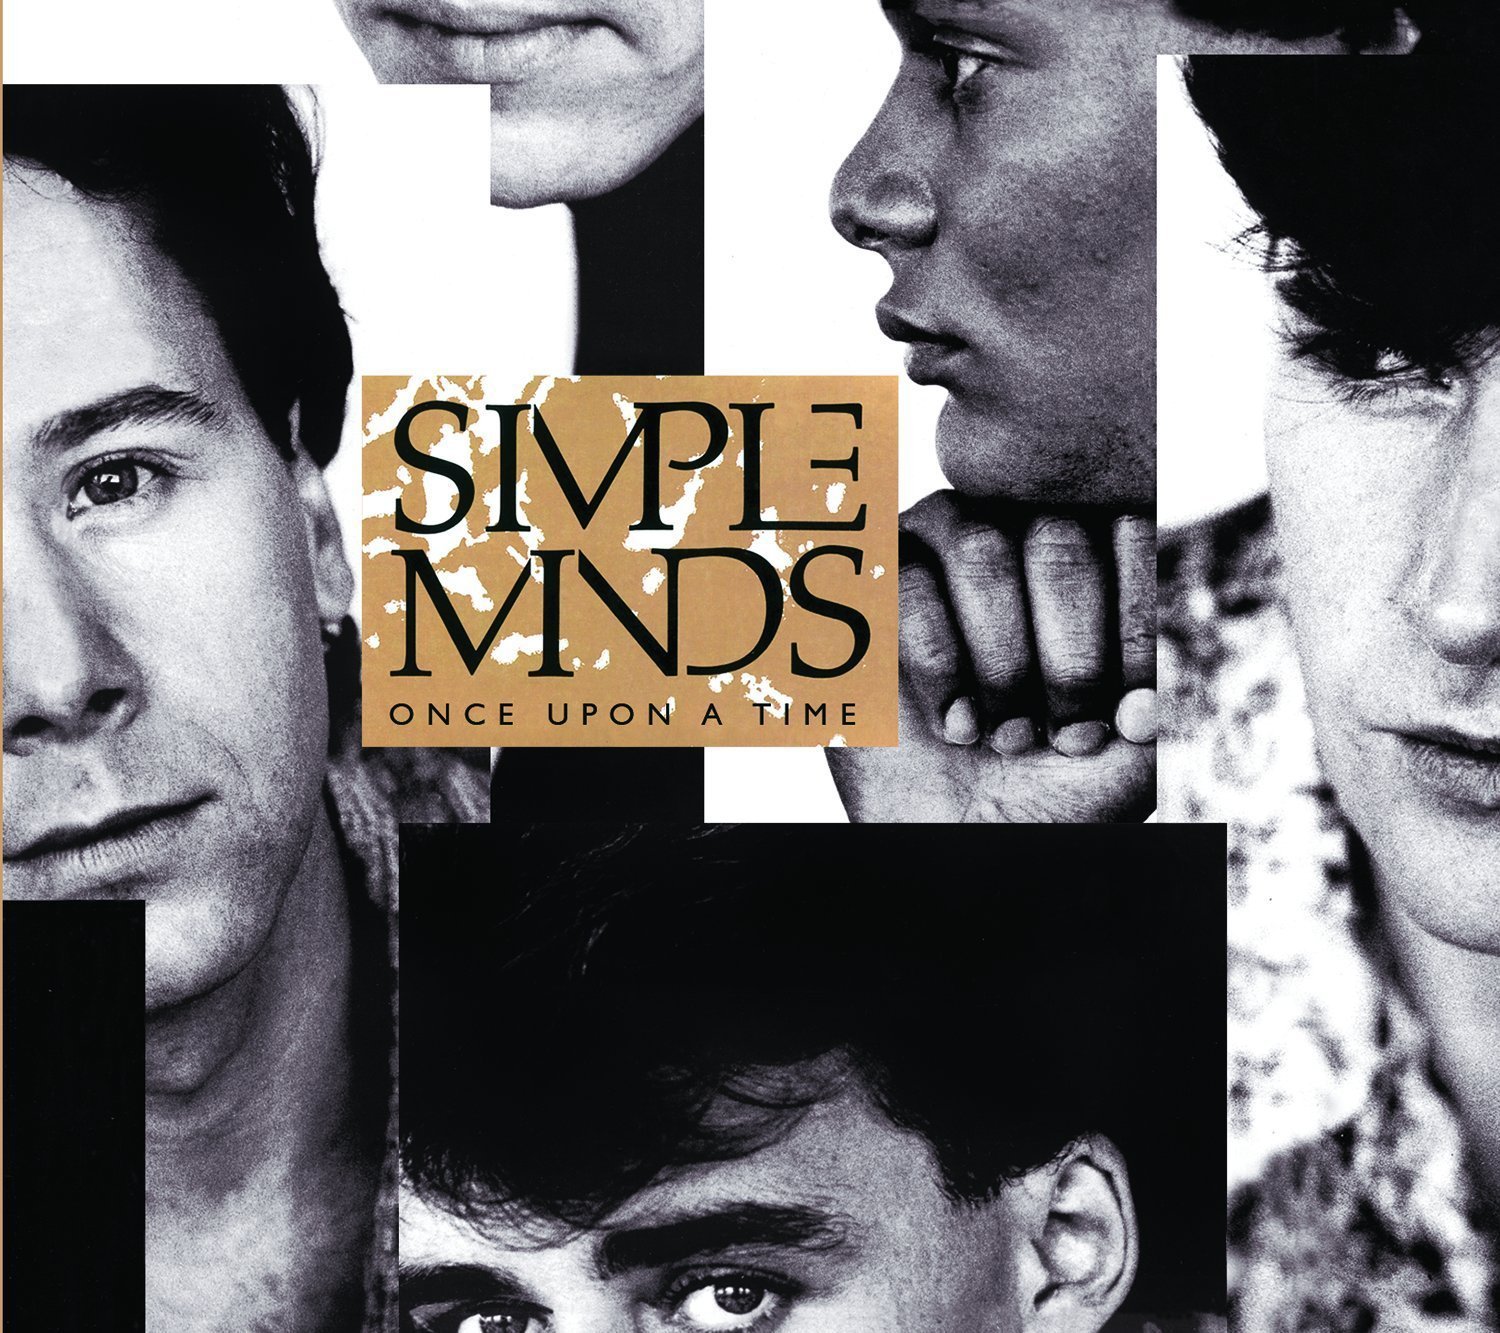 A 35 años del 'Once Upon a Time' de Simple Minds